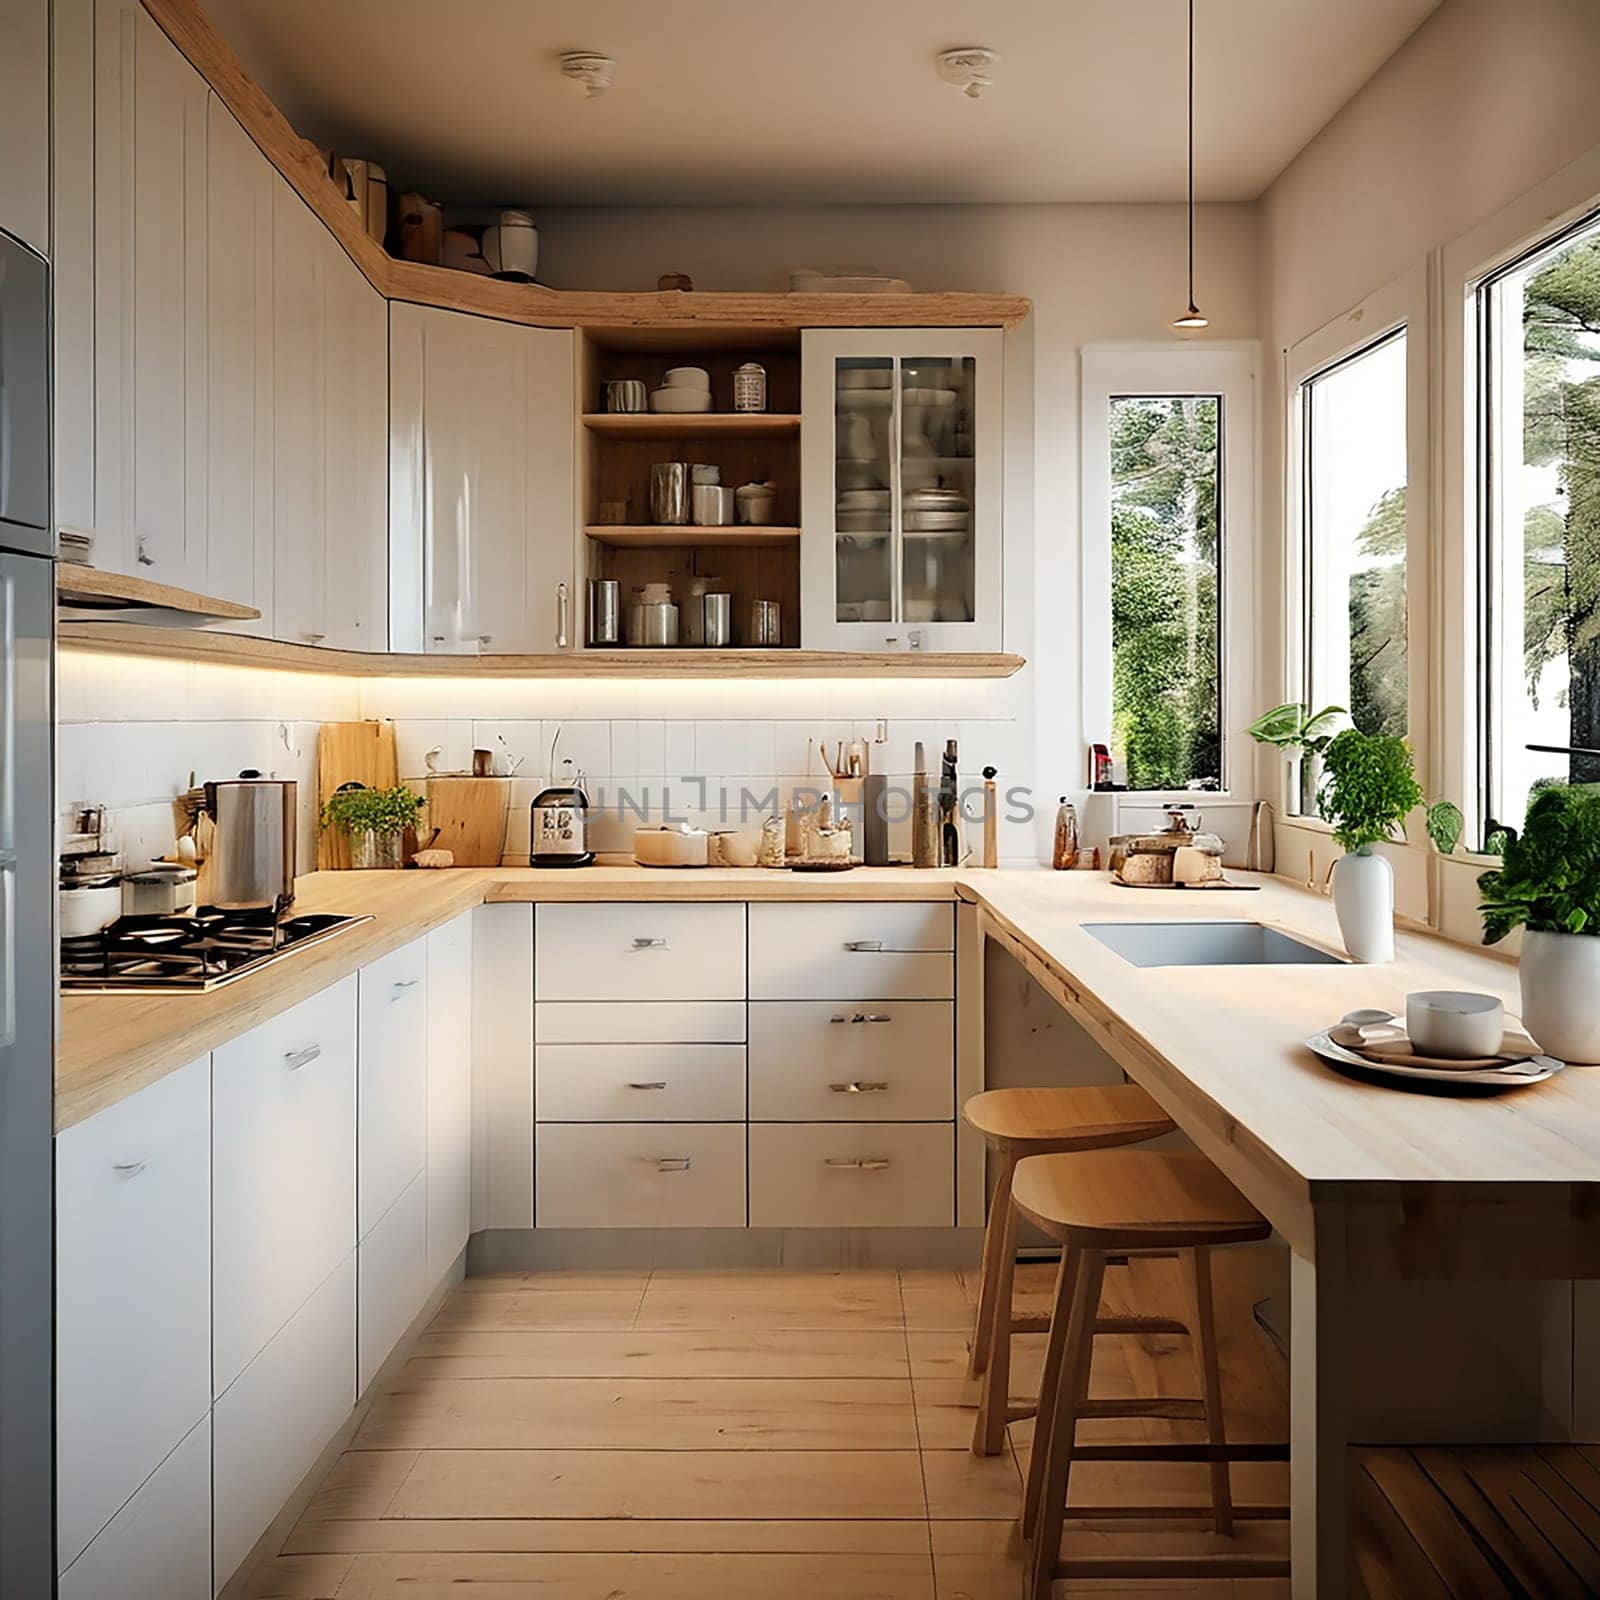 Efficiency Redefined: Designing a Kitchen for Seamless Workflow